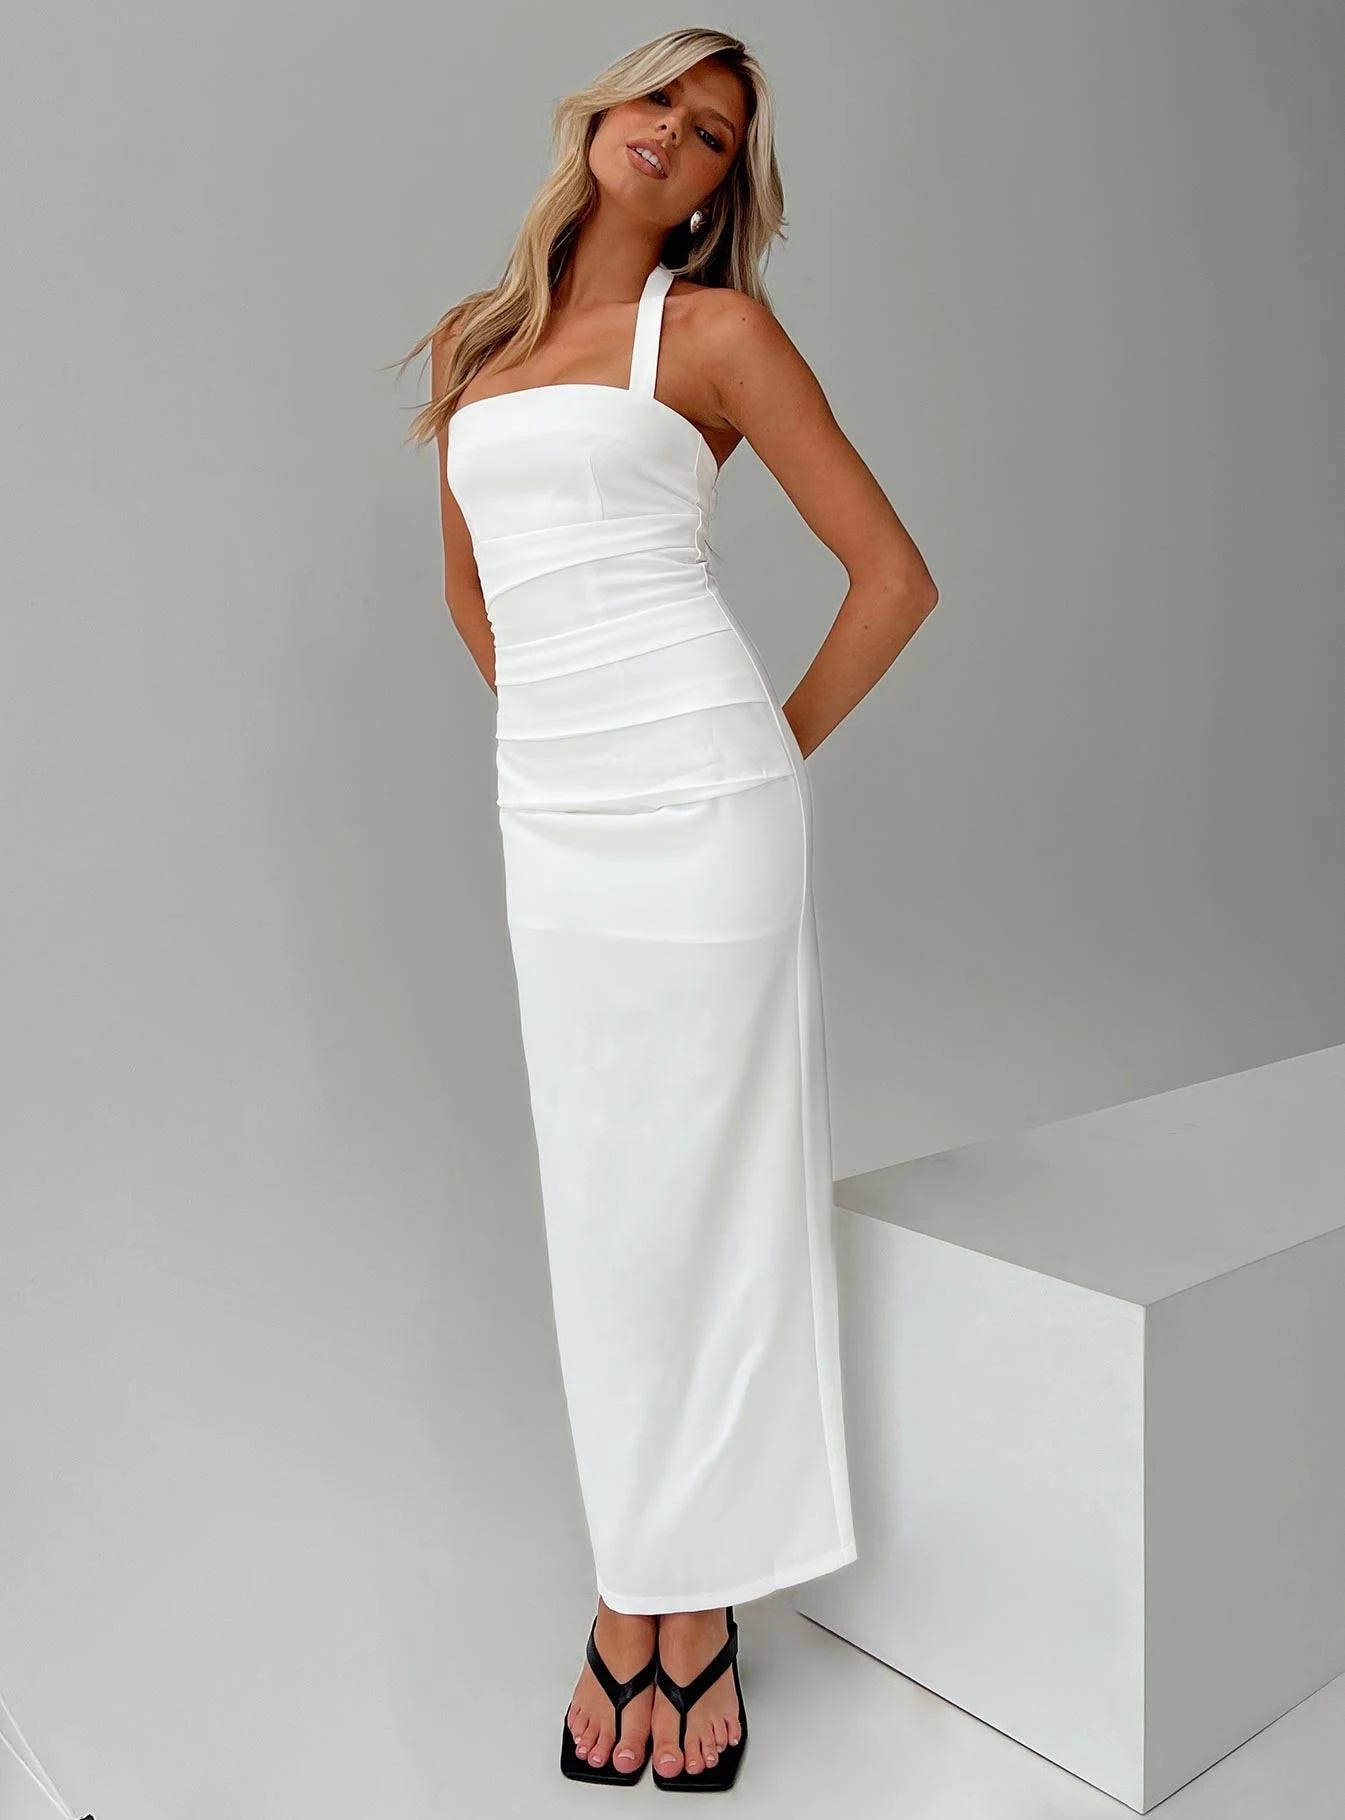 Empowering Porcelain Maxi Dress for Summer Cocktail Events | Image